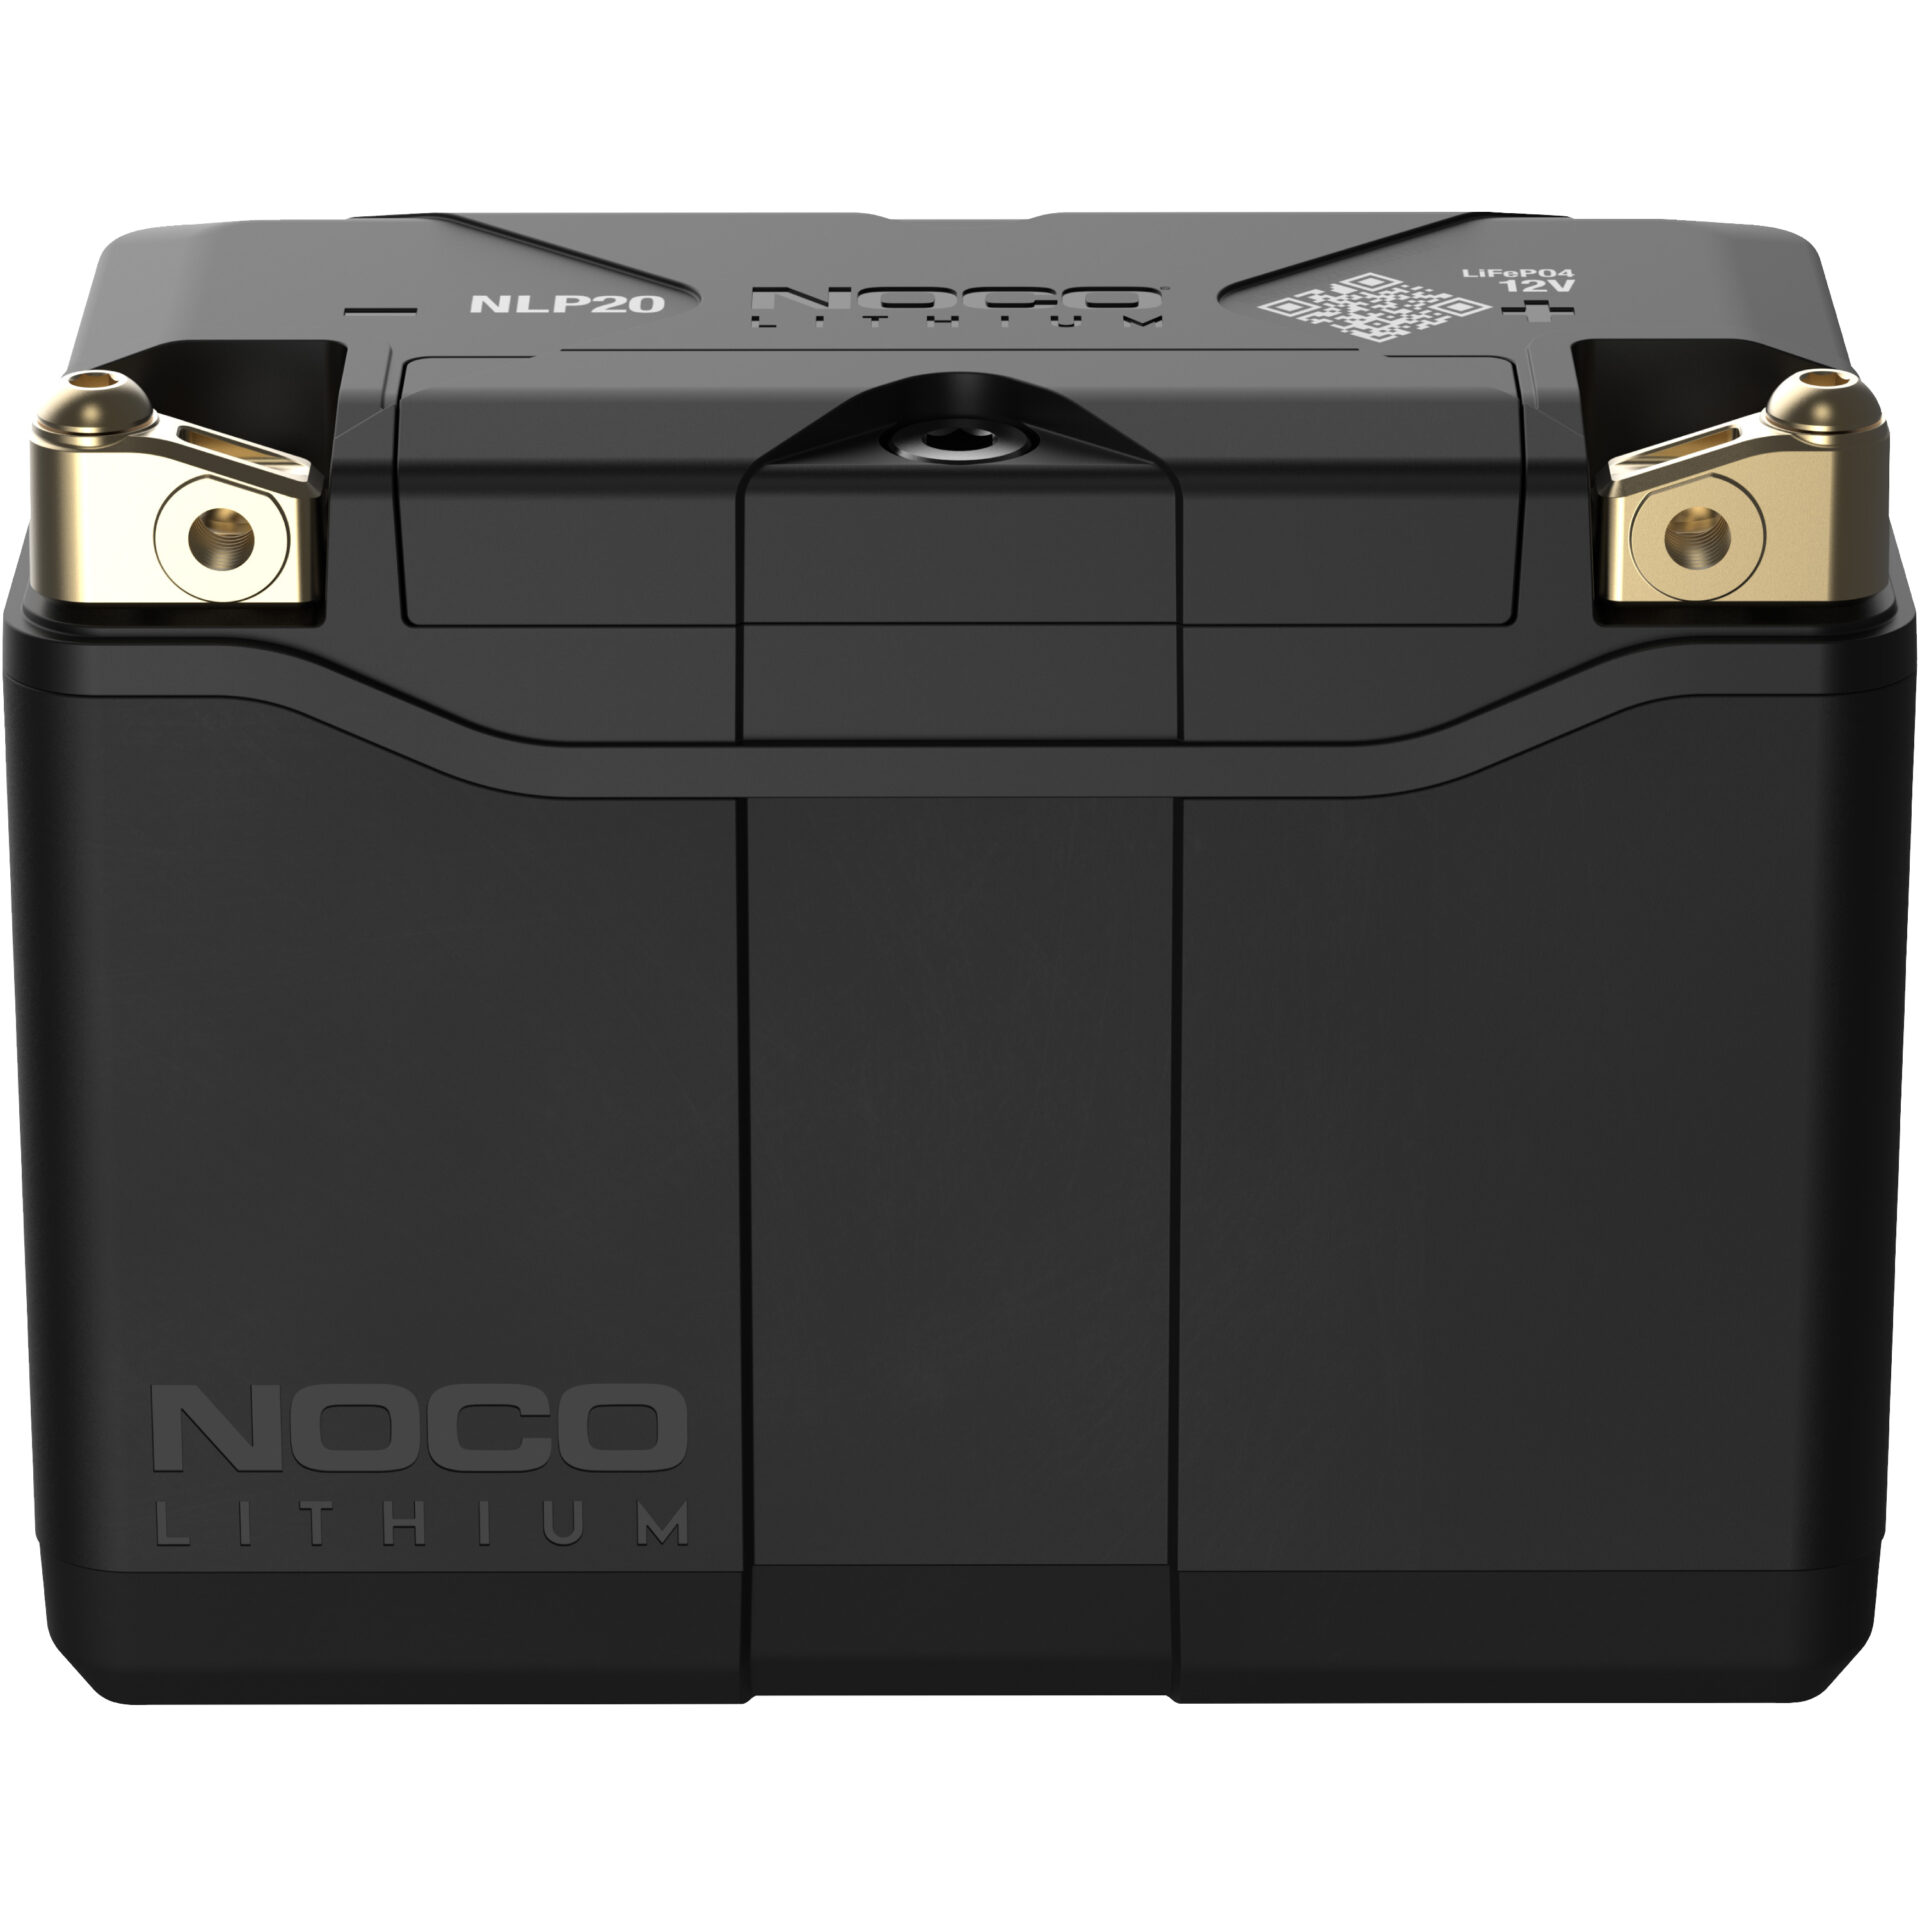 Lithium Powersports Battery by Noco